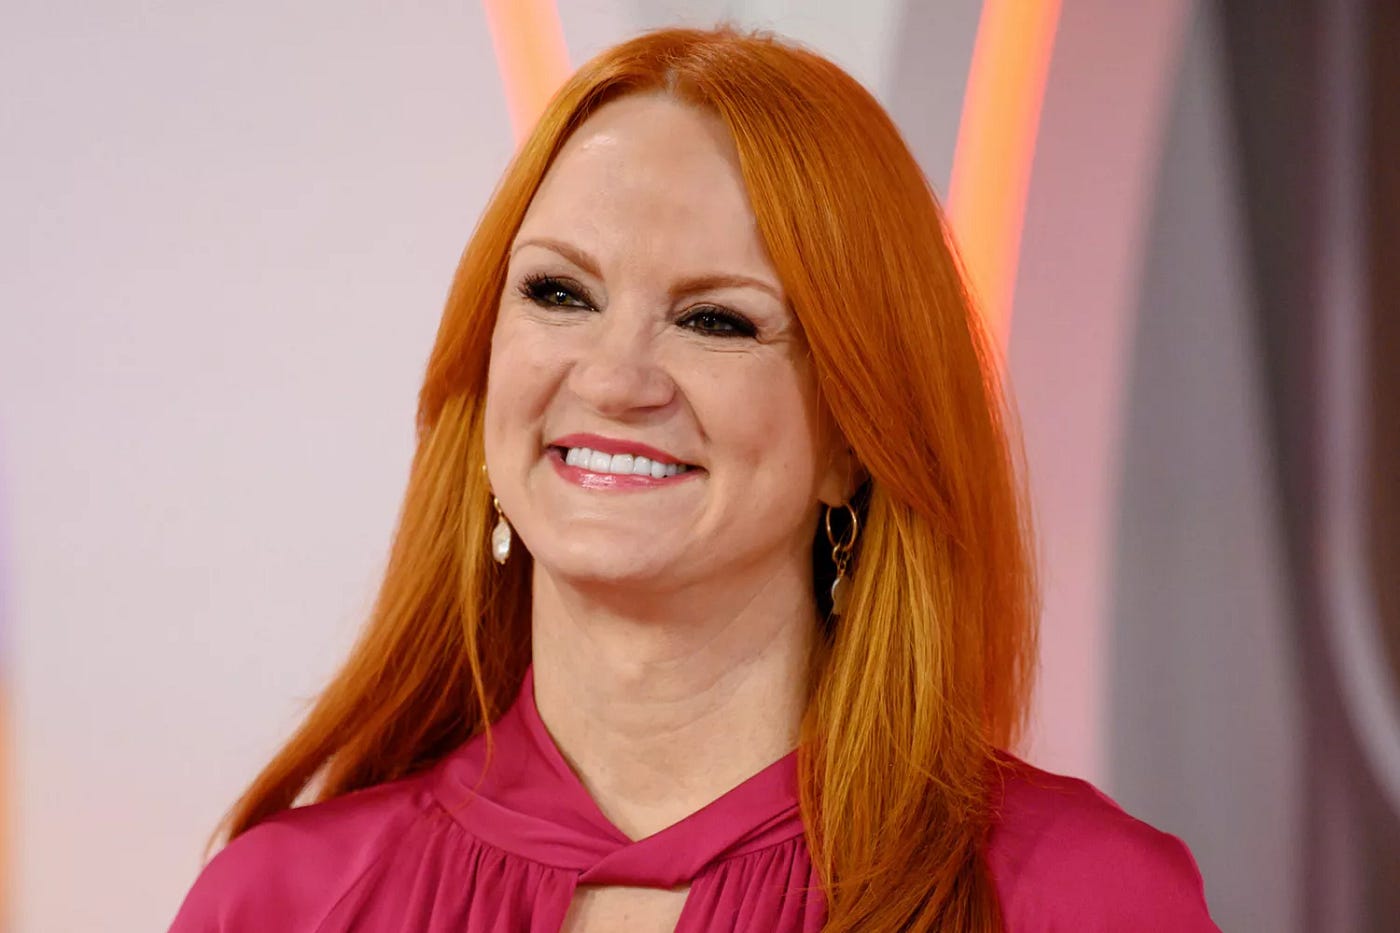 Ree Drummond's Inspiring Weight Loss Journey: A Recipe for Personal Transformation